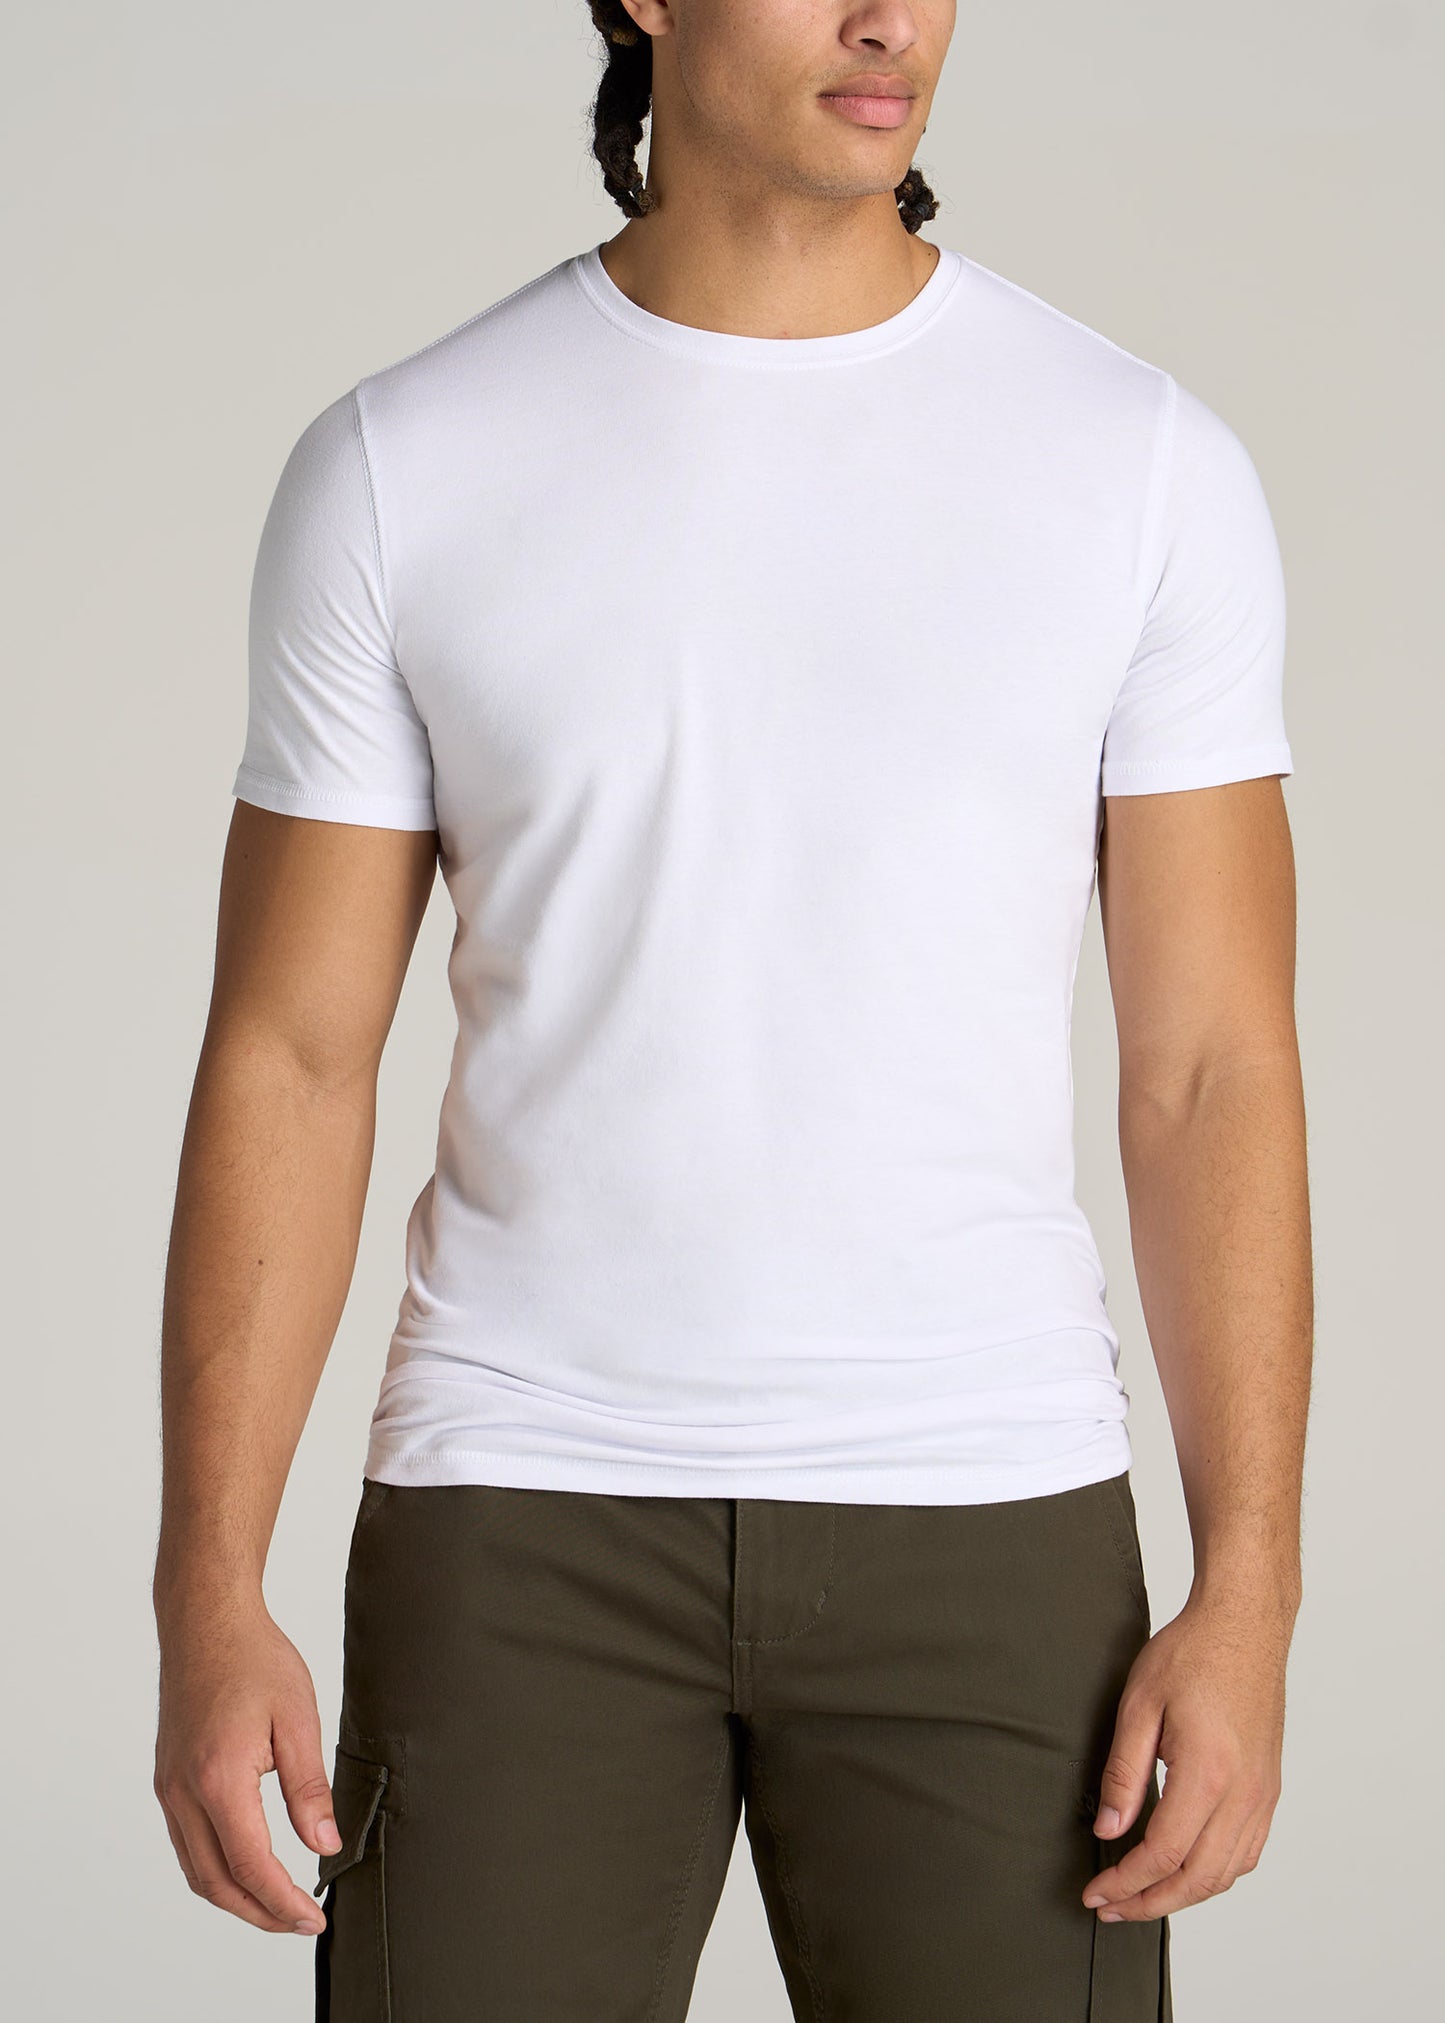    American-Tall-Men-Essential-SLIM-FIT-Crew-Neck-Tees-White-front